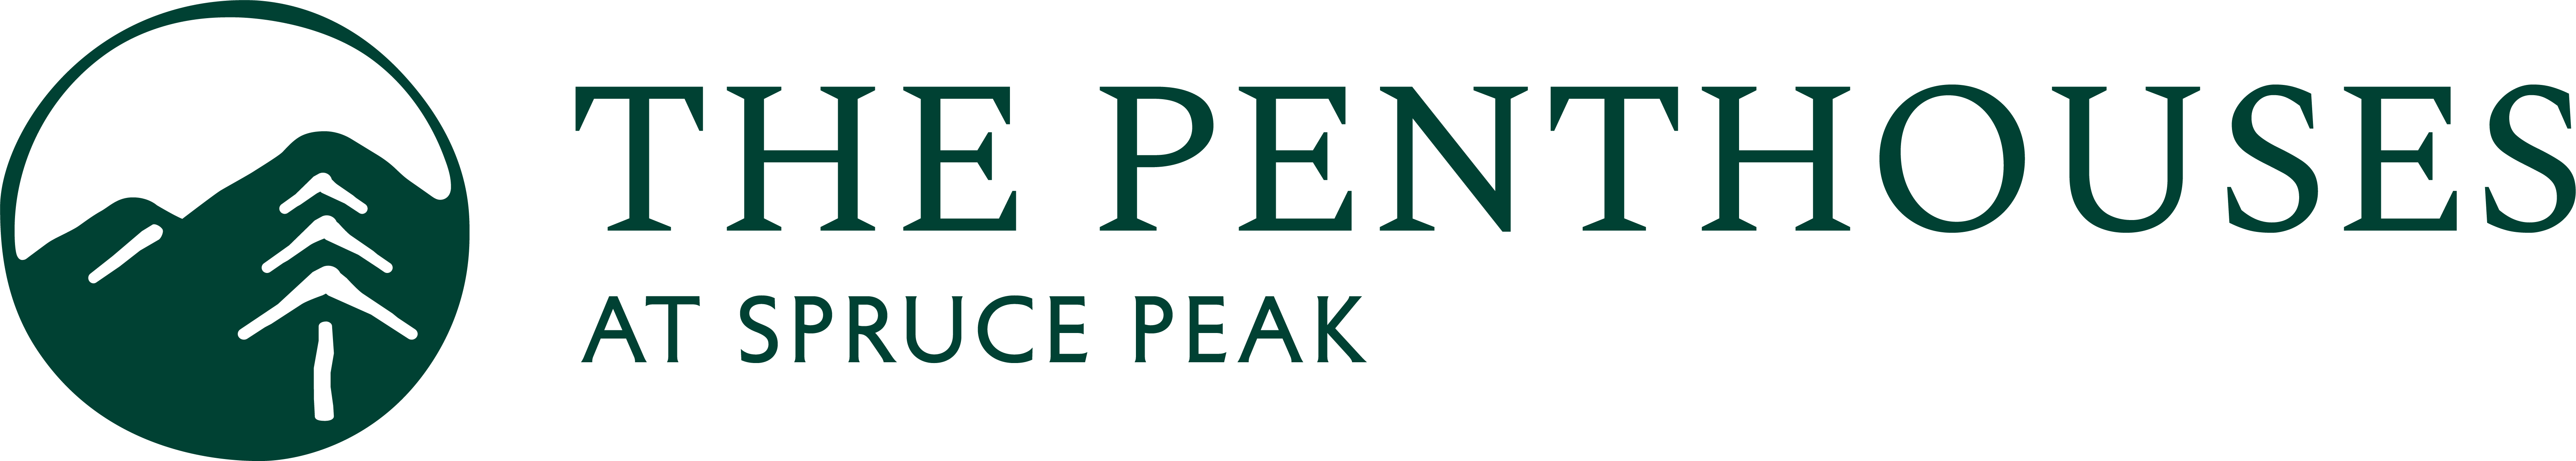 The Penthouses at Spruce Peak